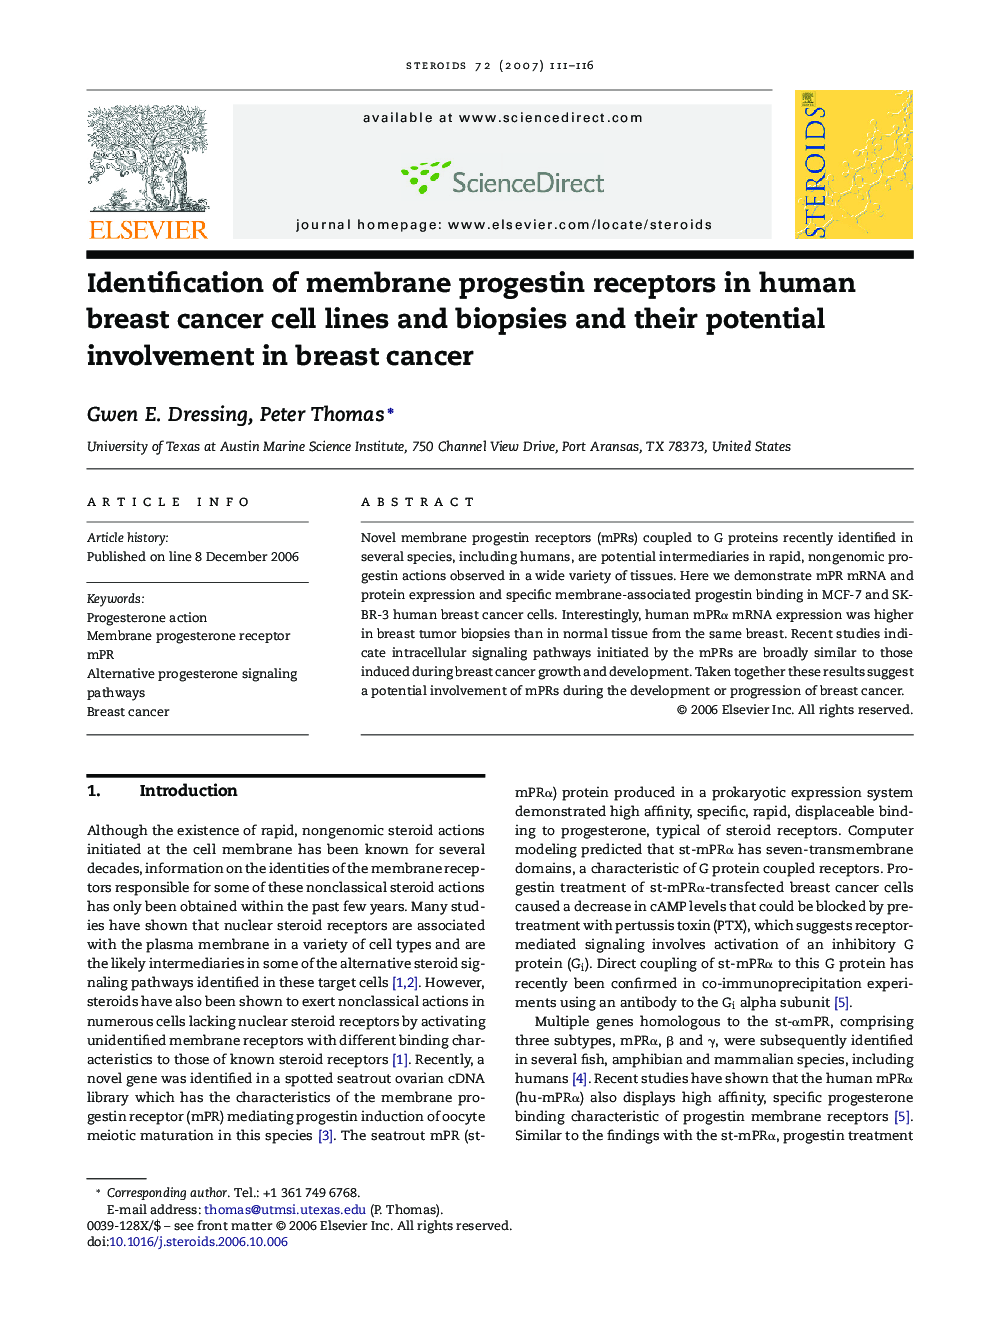 Identification of membrane progestin receptors in human breast cancer cell lines and biopsies and their potential involvement in breast cancer